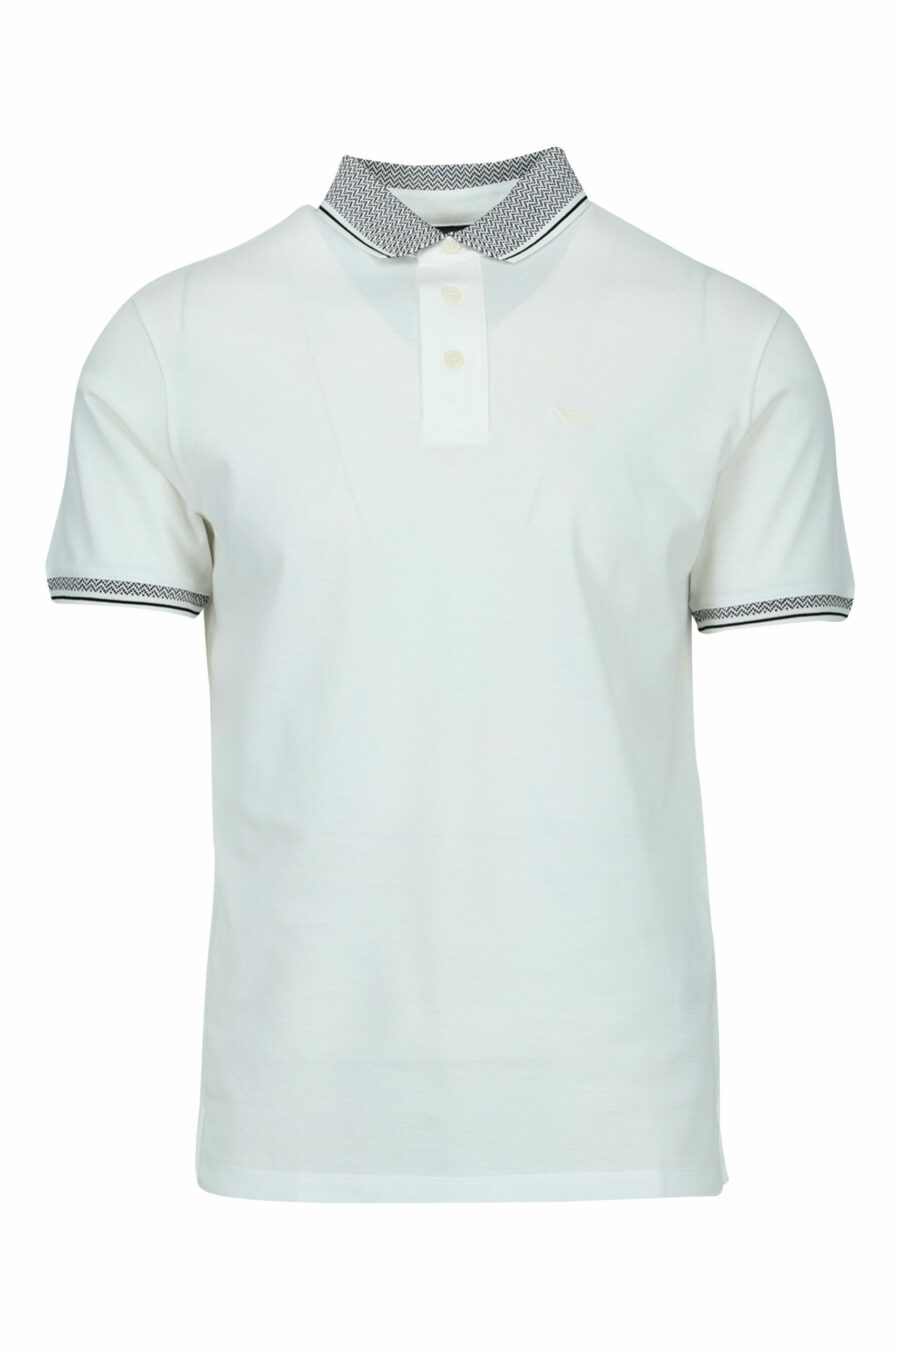 White polo shirt with classic grey collar - 8058947967995 scaled